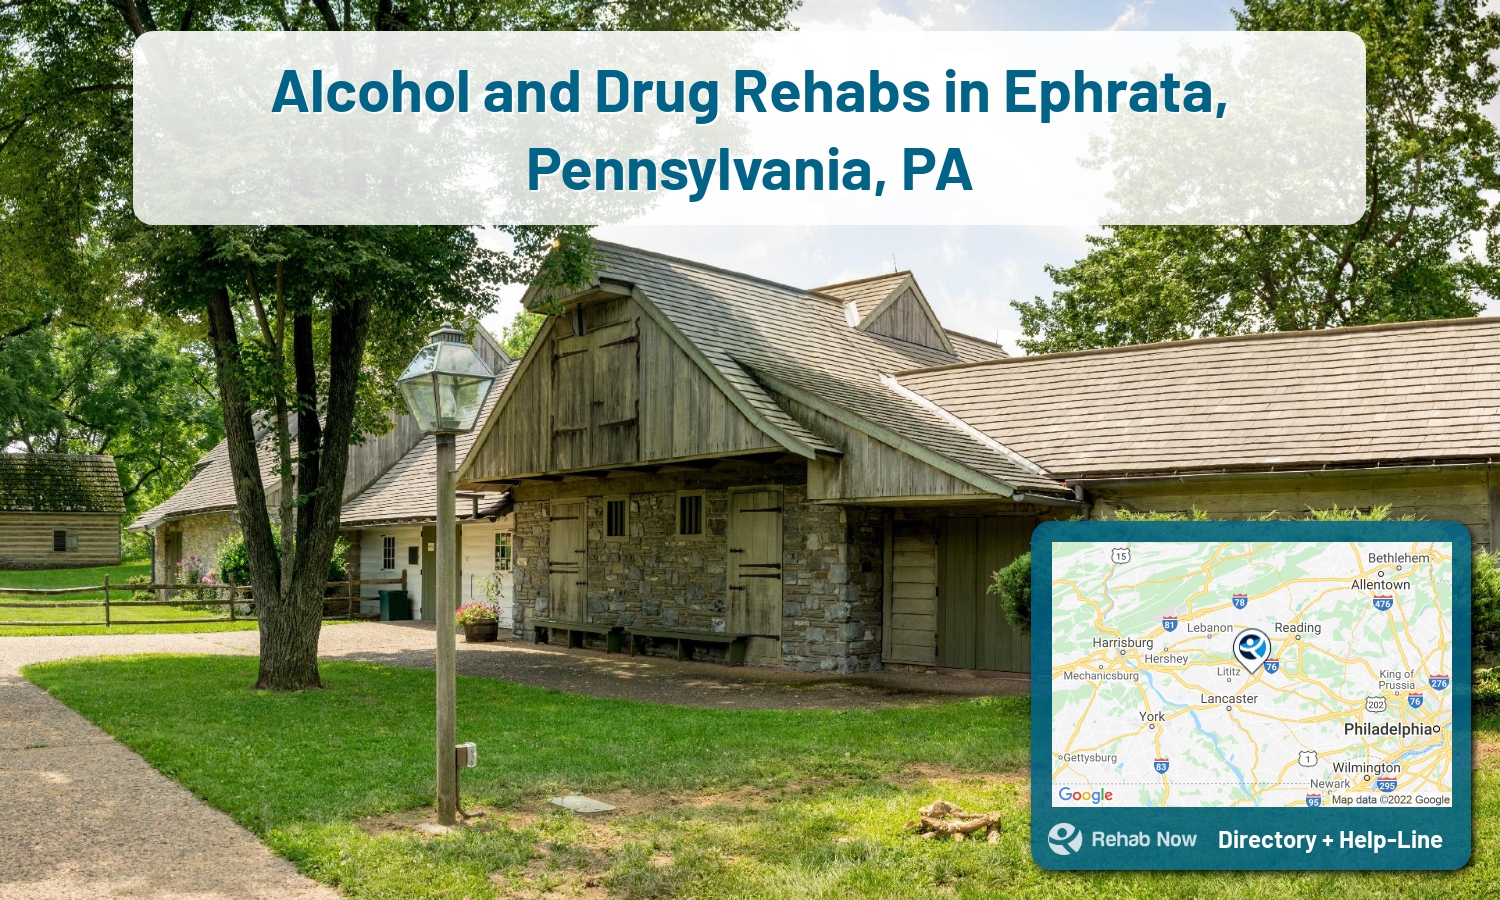 Ephrata, PA Treatment Centers. Find drug rehab in Ephrata, Pennsylvania, or detox and treatment programs. Get the right help now!